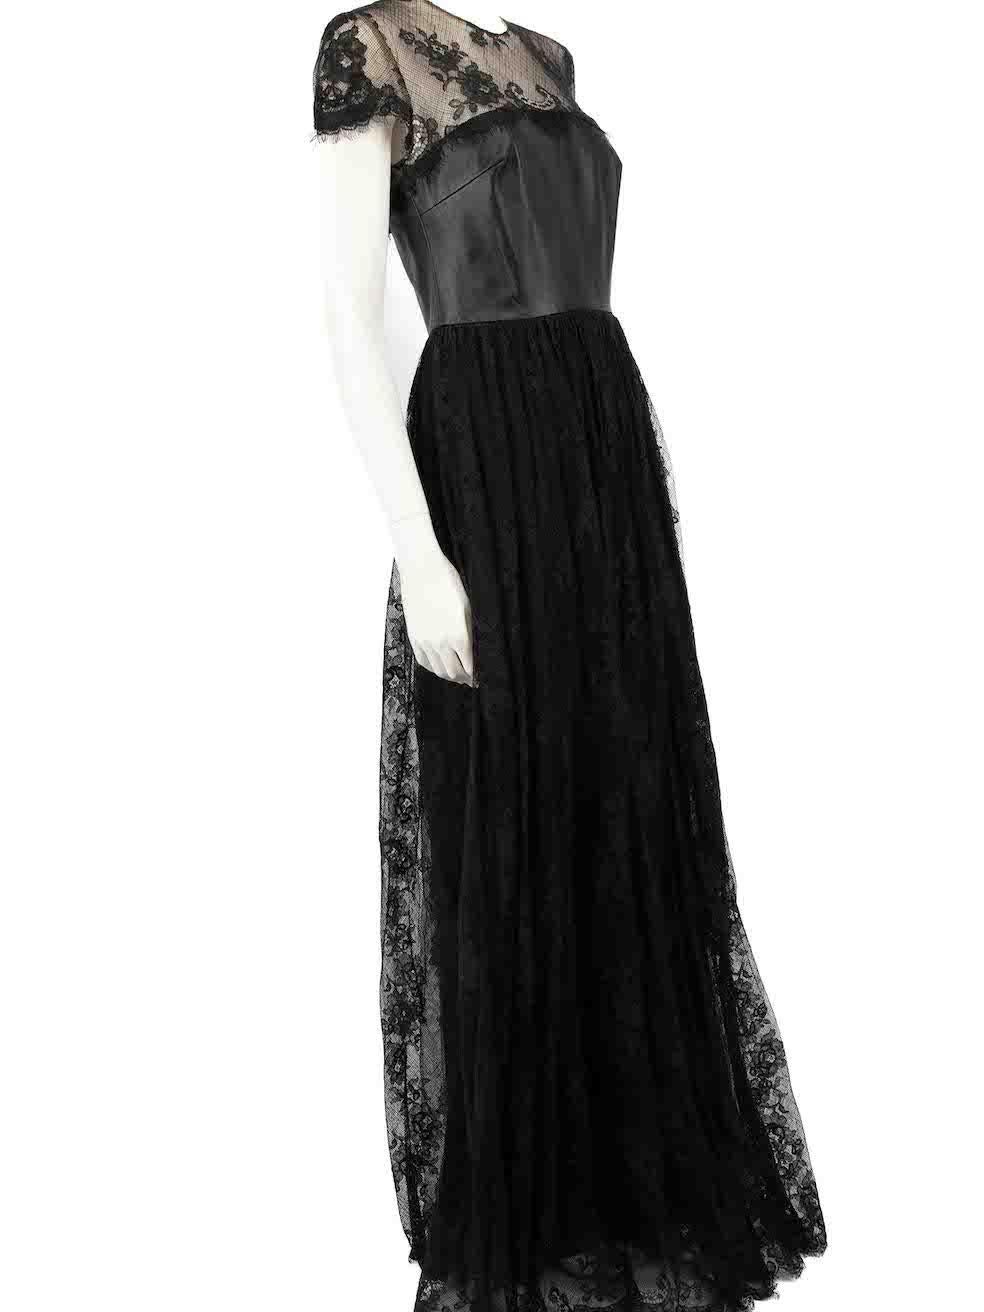 CONDITION is Very good. Minimal wear to dress is evident. Minimal wear to lining with discolouration on this used Honayda designer resale item.
 
 
 
 Details
 
 
 Black
 
 Lace
 
 Gown
 
 Short sleeves
 
 Leather panel
 
 Round neck
 
 Maxi
 
 Back